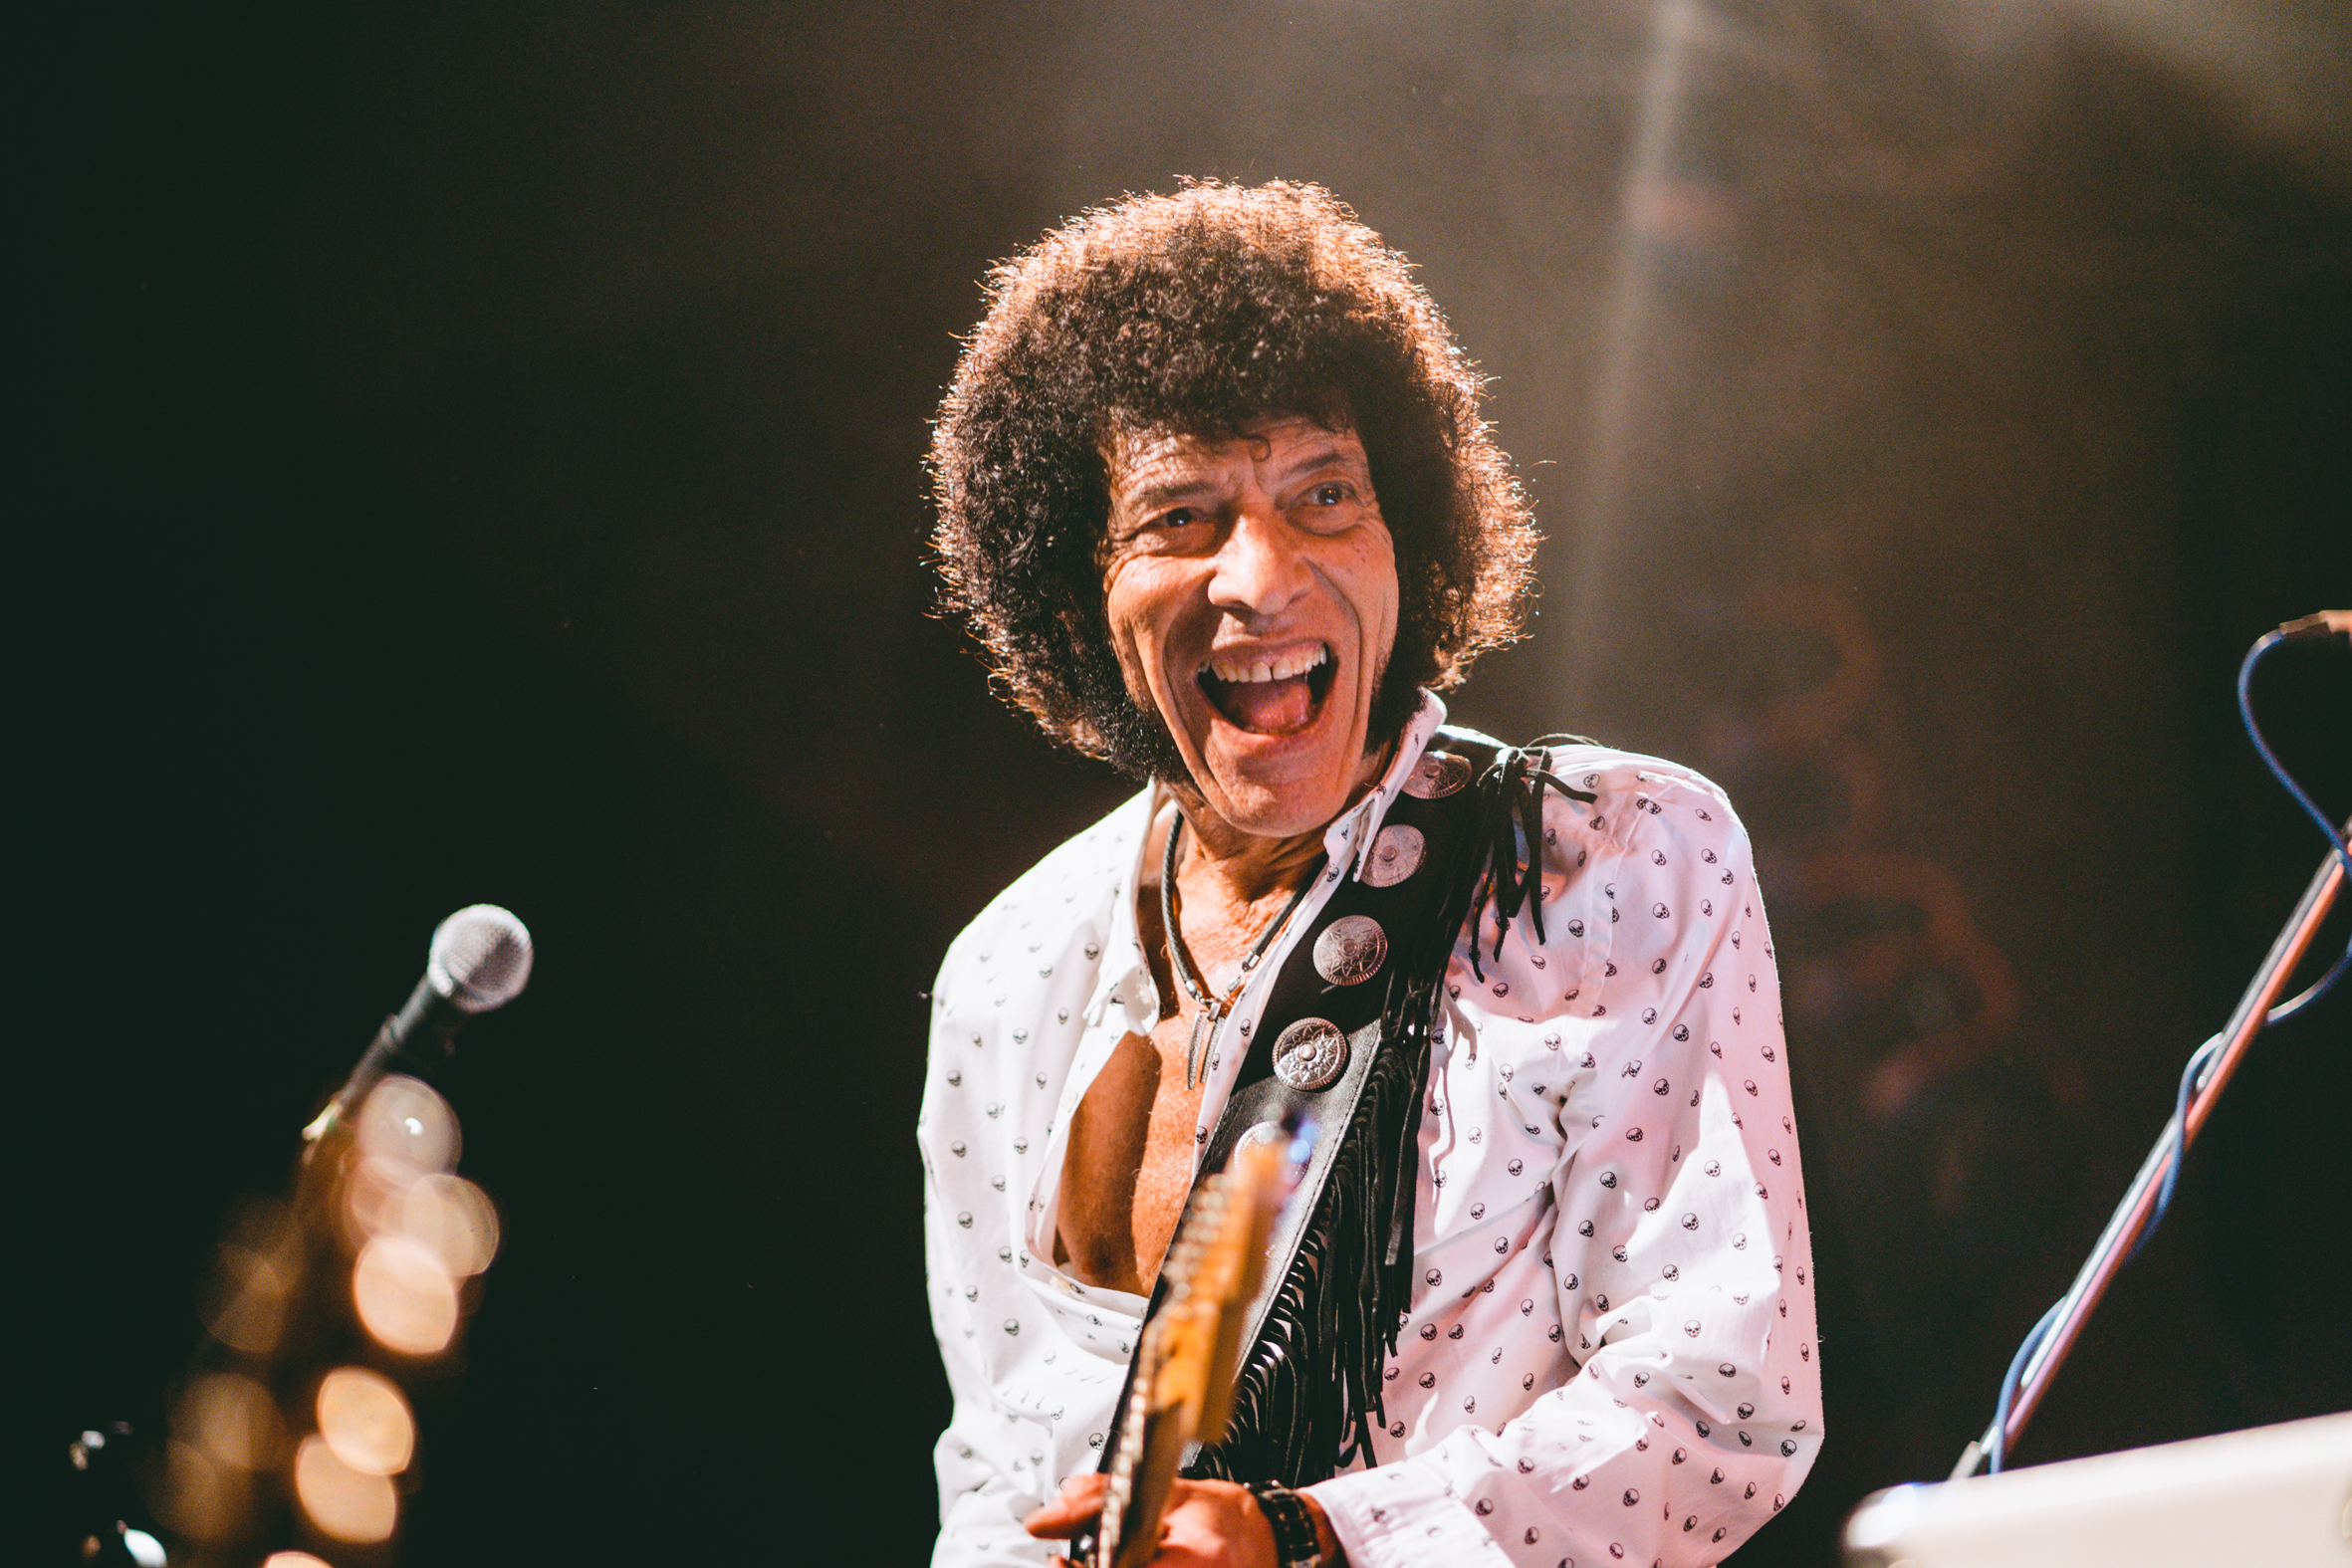 One Media secures exclusive rights to over 300 Ray Dorset recordings